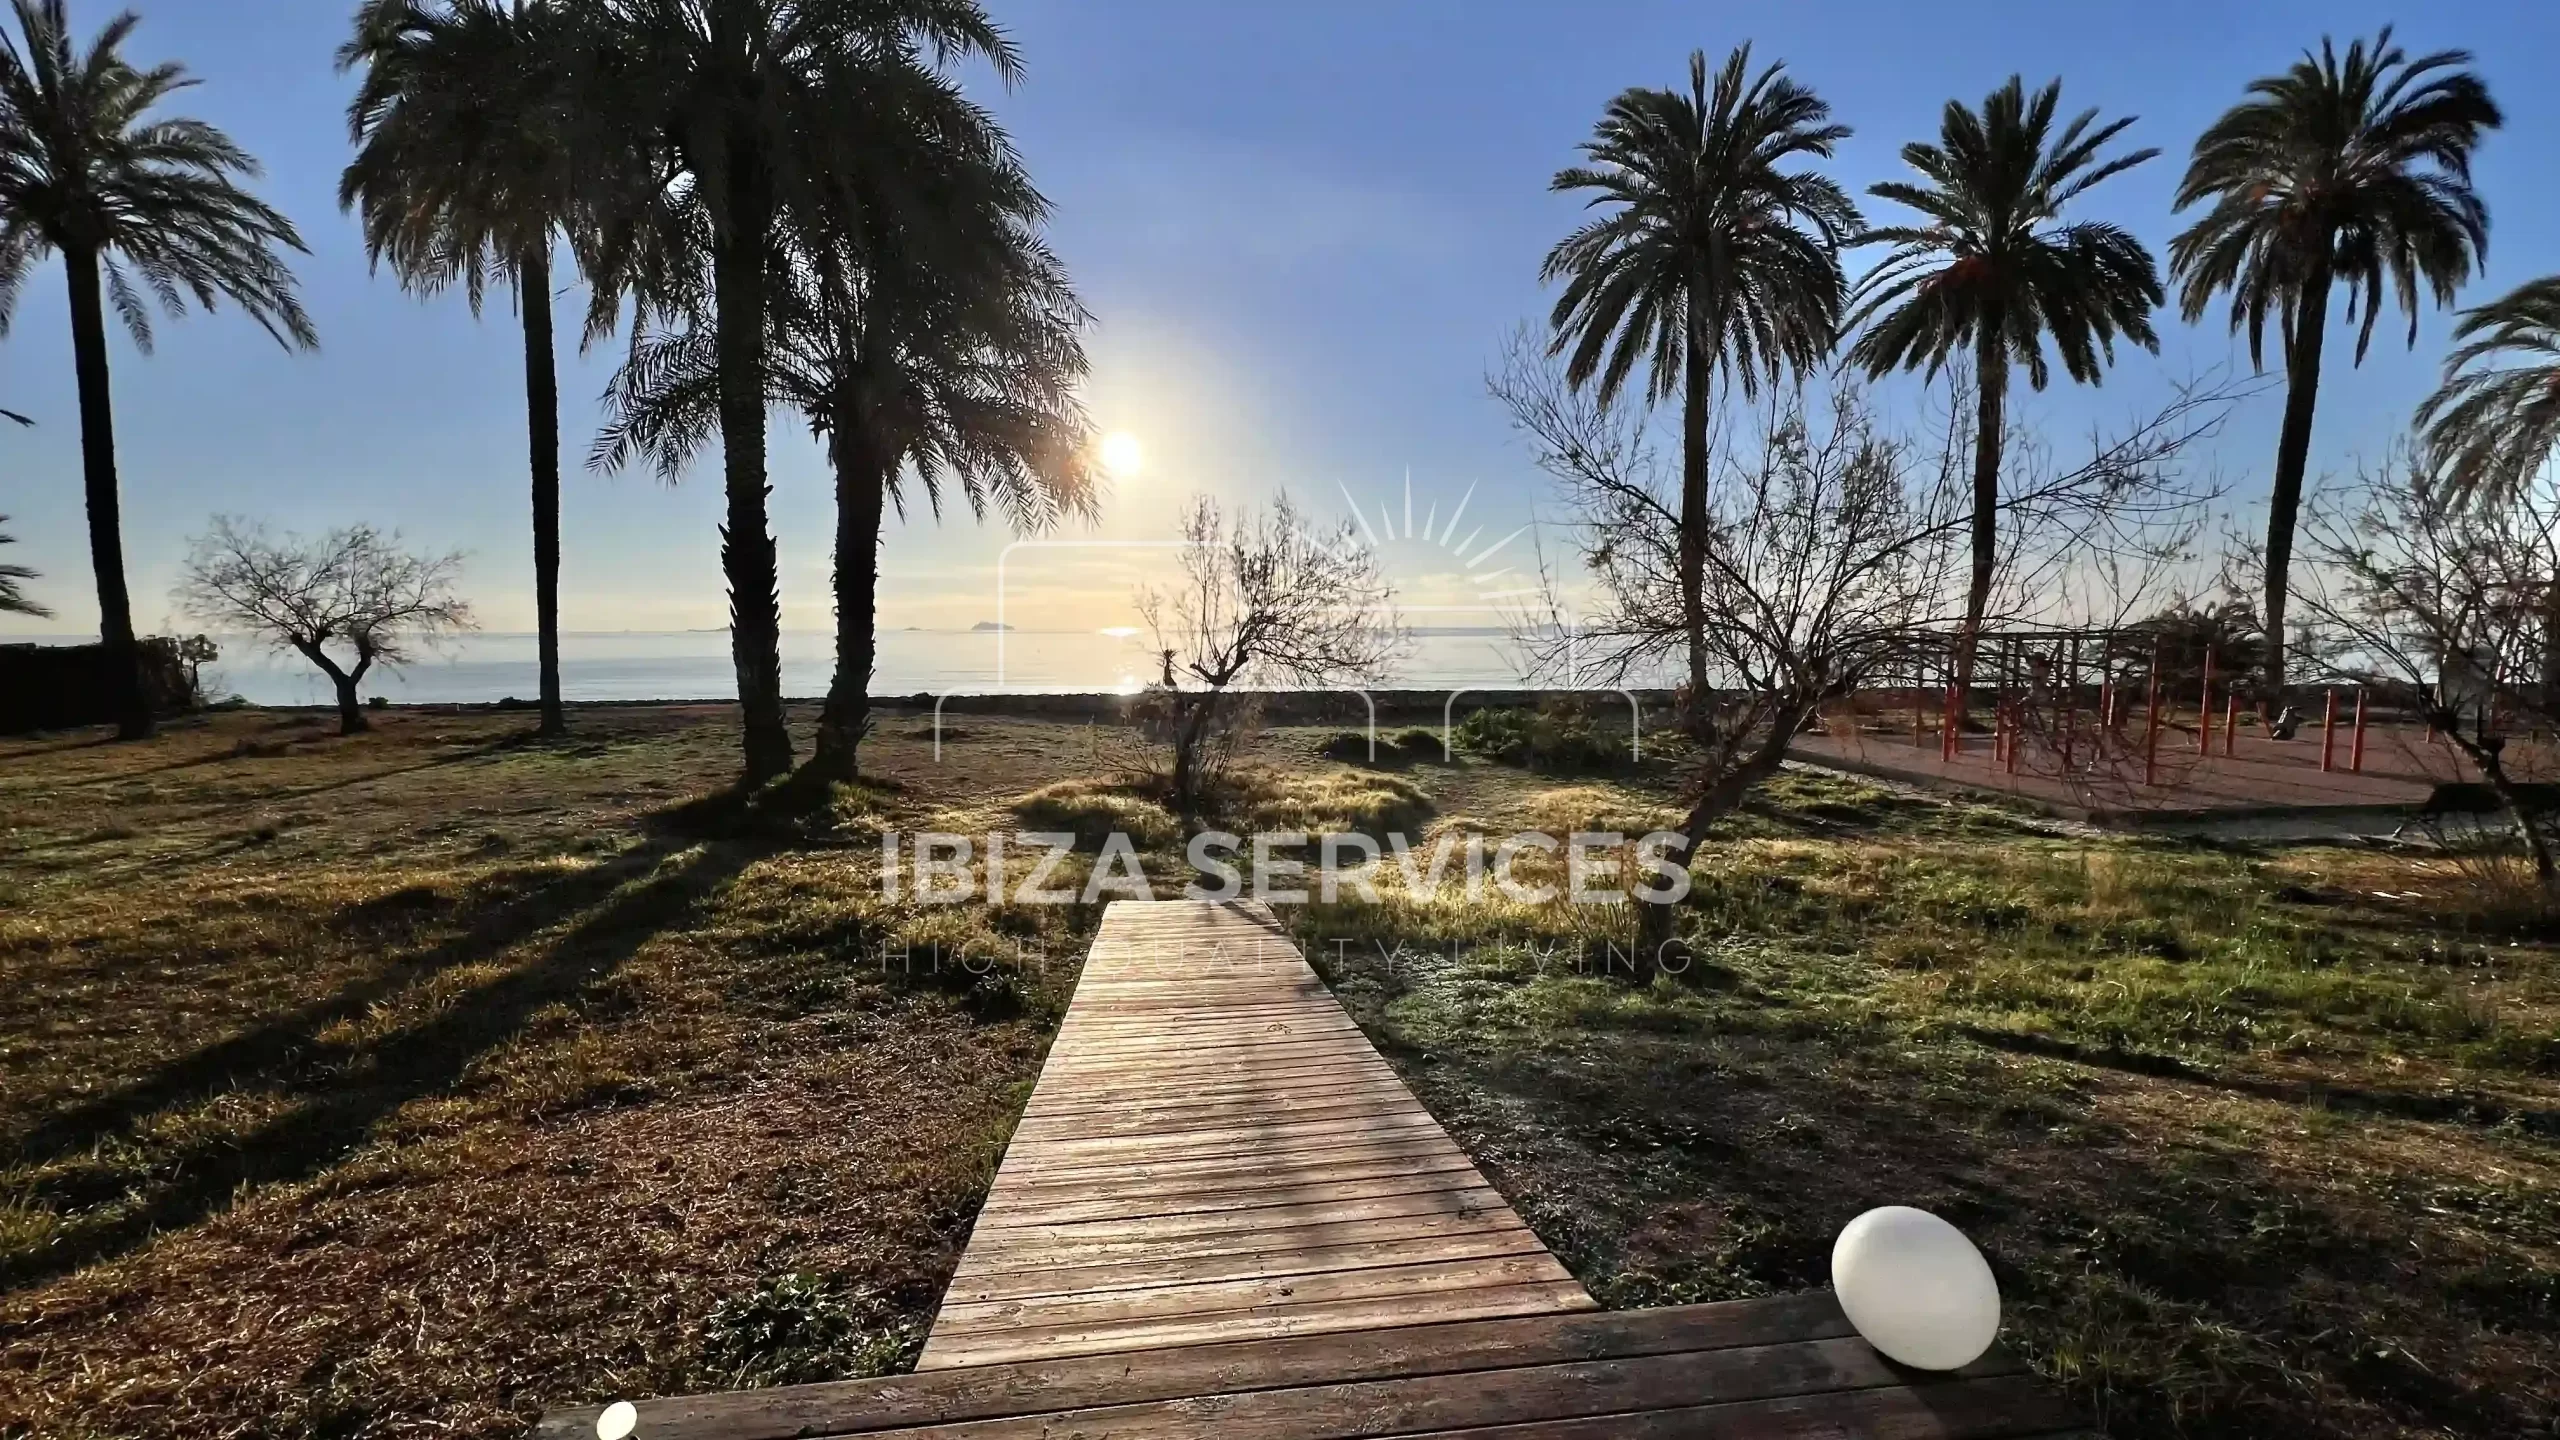 Duplex Apartment with a Seaview in Playa den Bossa for Rent